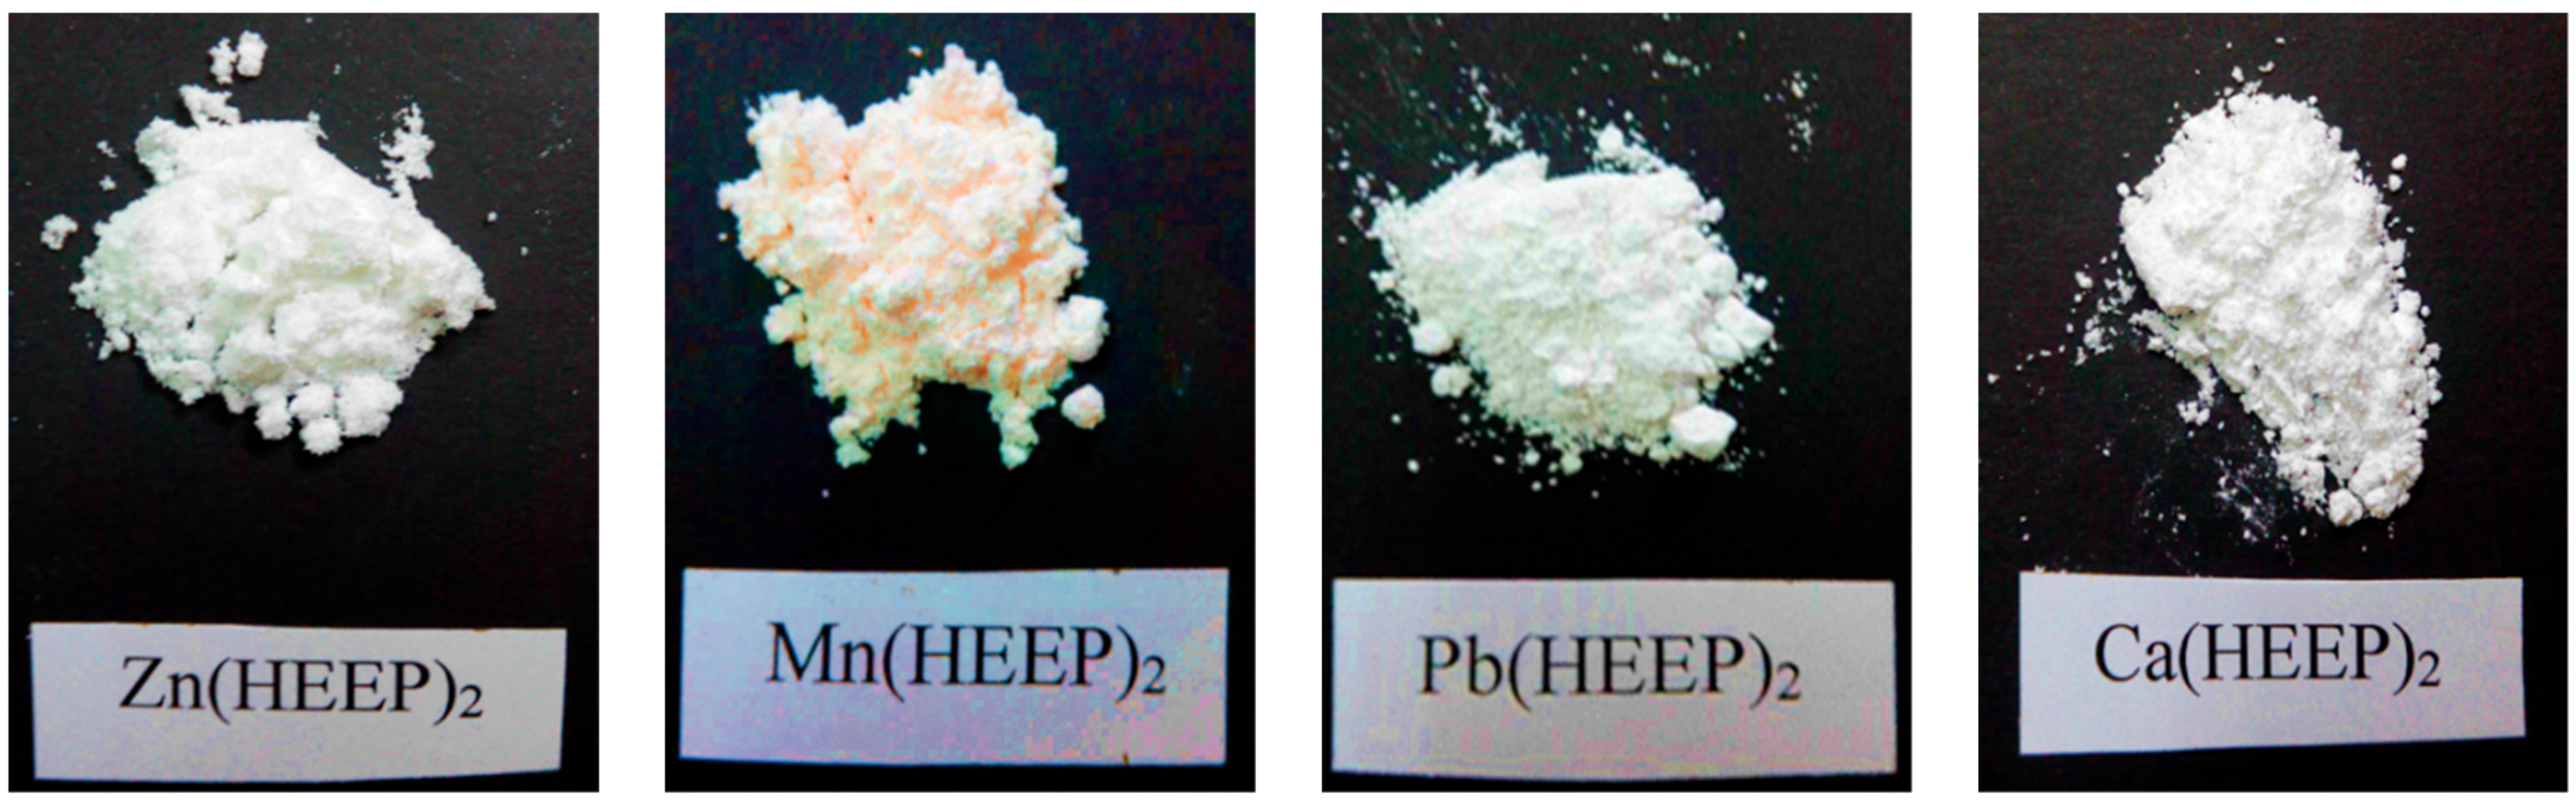 Different Types of Cocaine